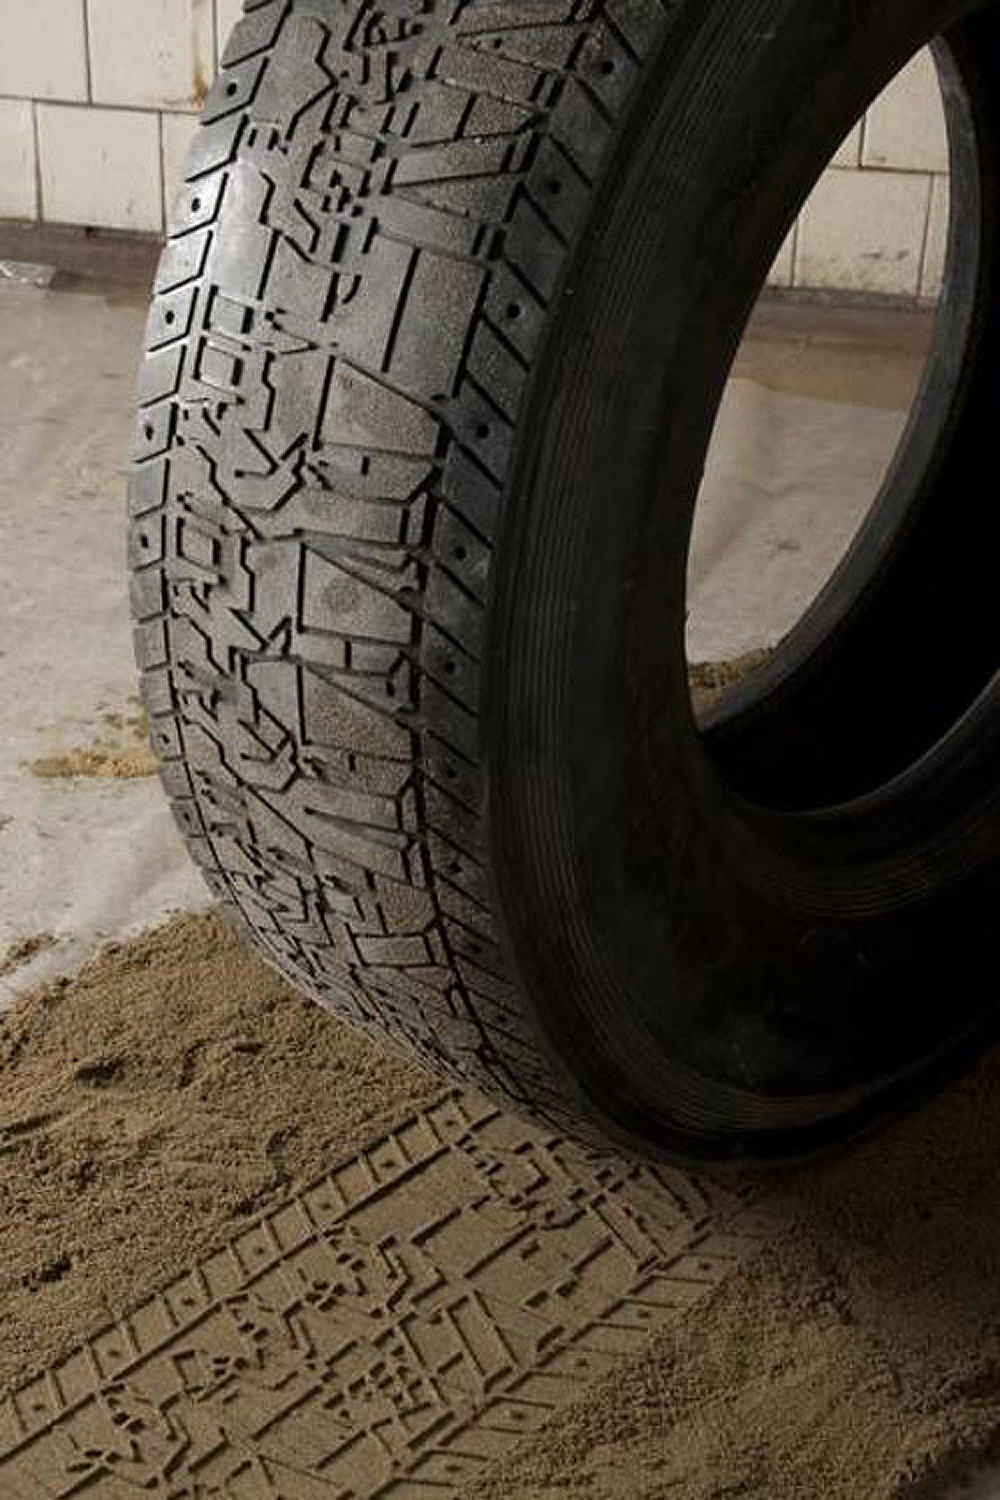 Recycle Group, ''Wheel'' (detail), 2010 Installation. Dimensions variable. Installation view of ''The Eye Never Sees Itself,'' 2nd Industrial Biennial of Contemporary Art, Yekaterinburg, Russia, 2012.